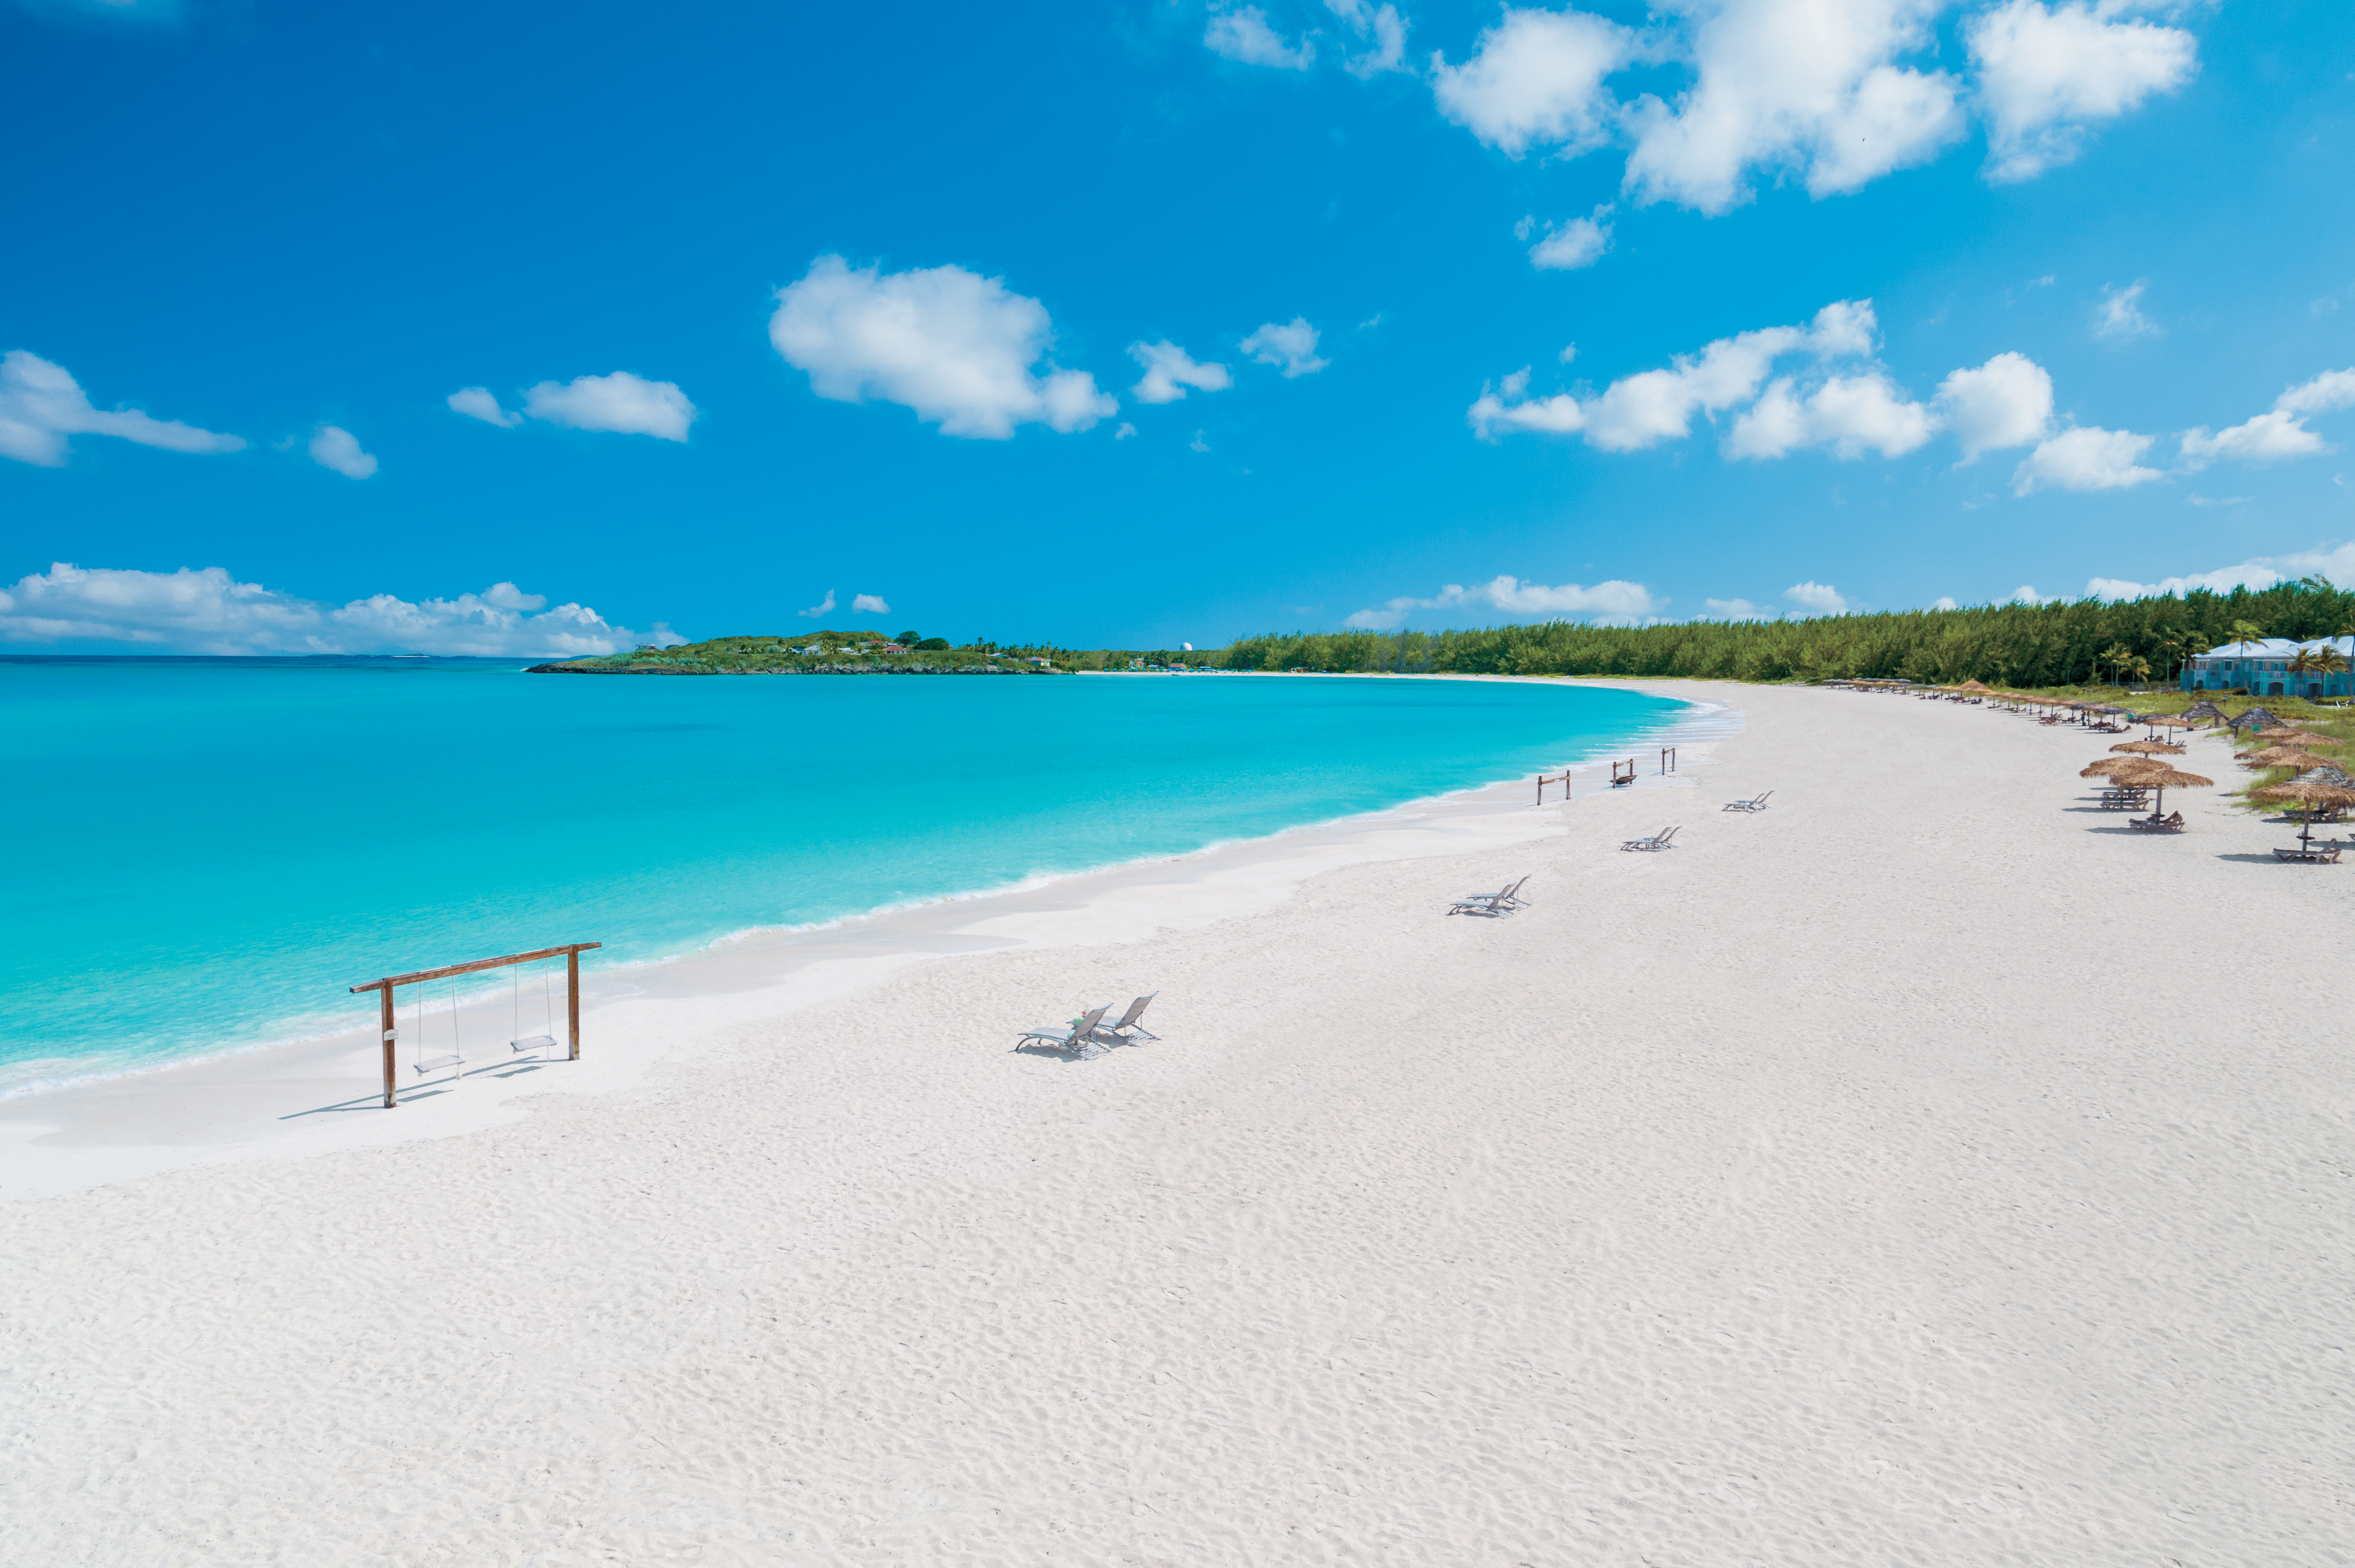 Top 5 Things to do in The Bahamas